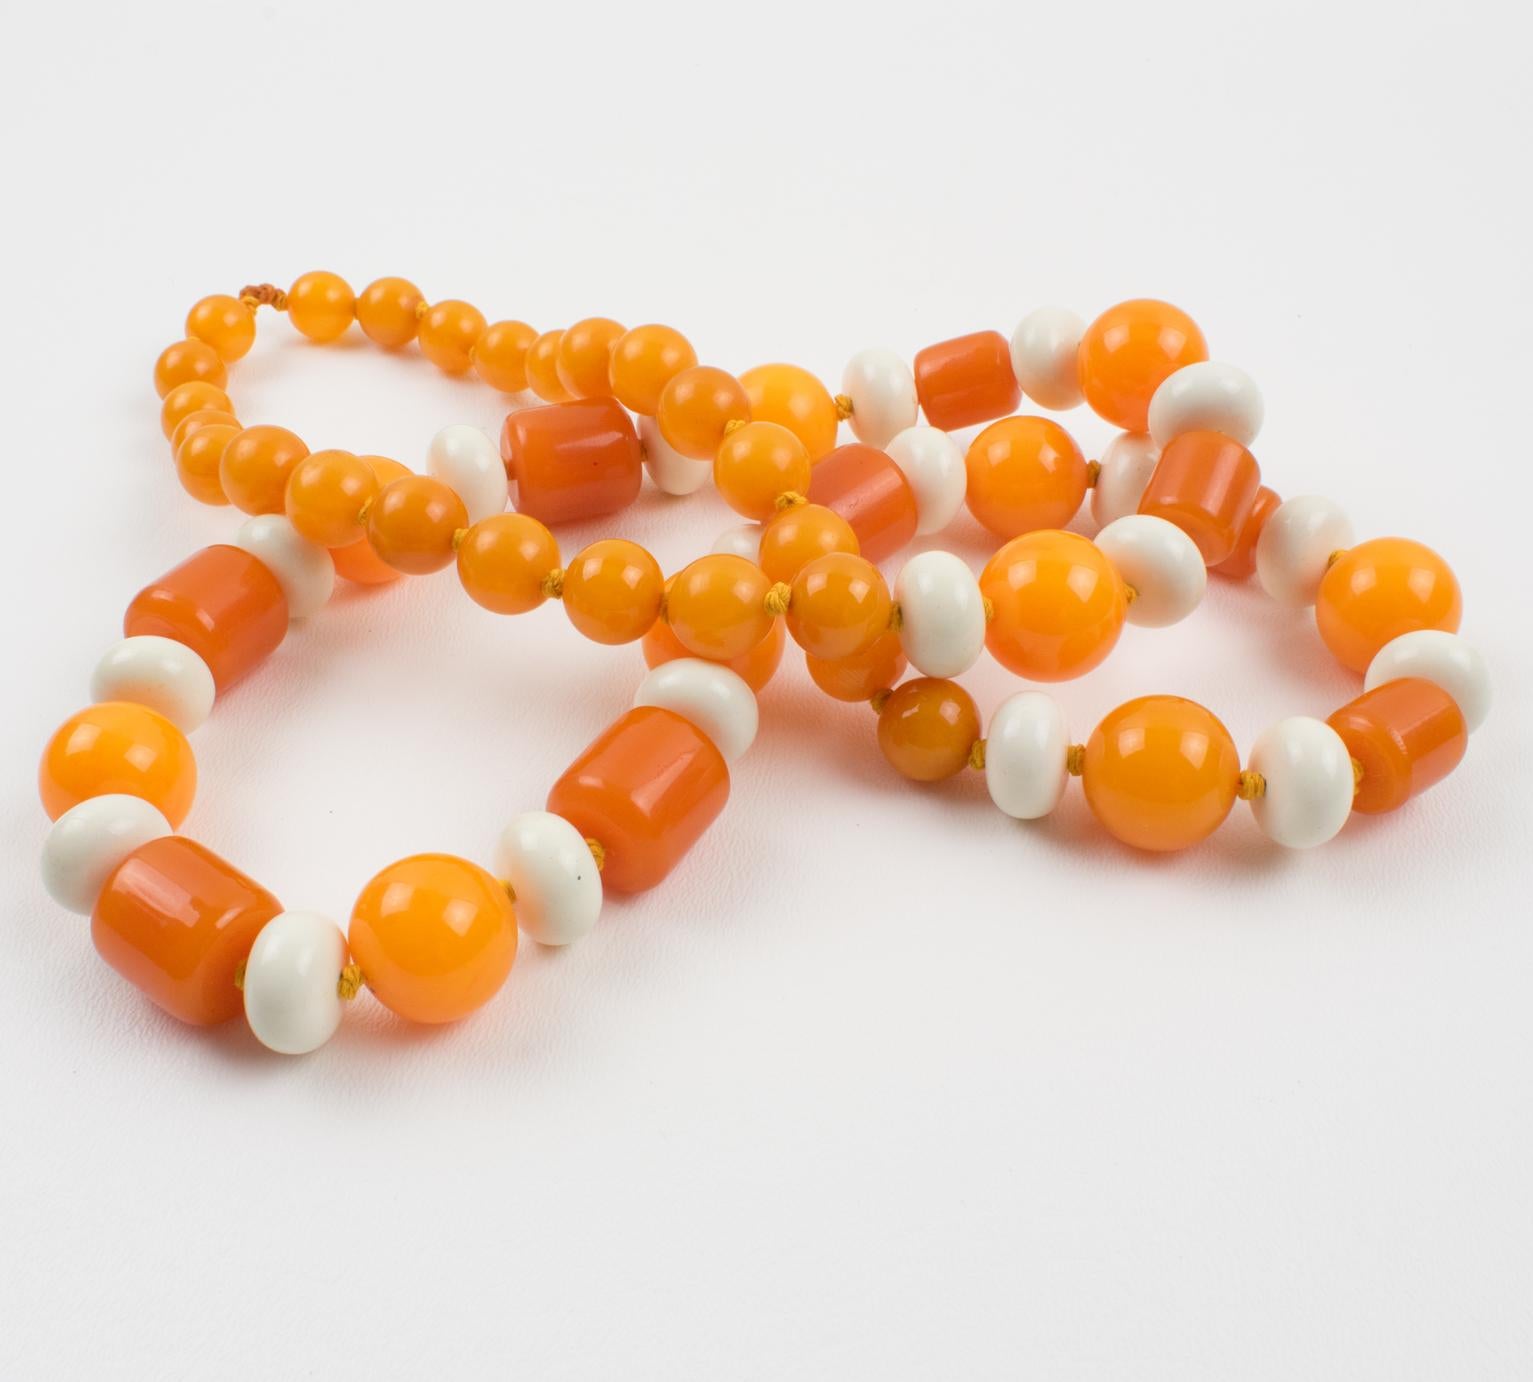 Bakelite and Lucite Long Necklace Orange and White Colors For Sale 4